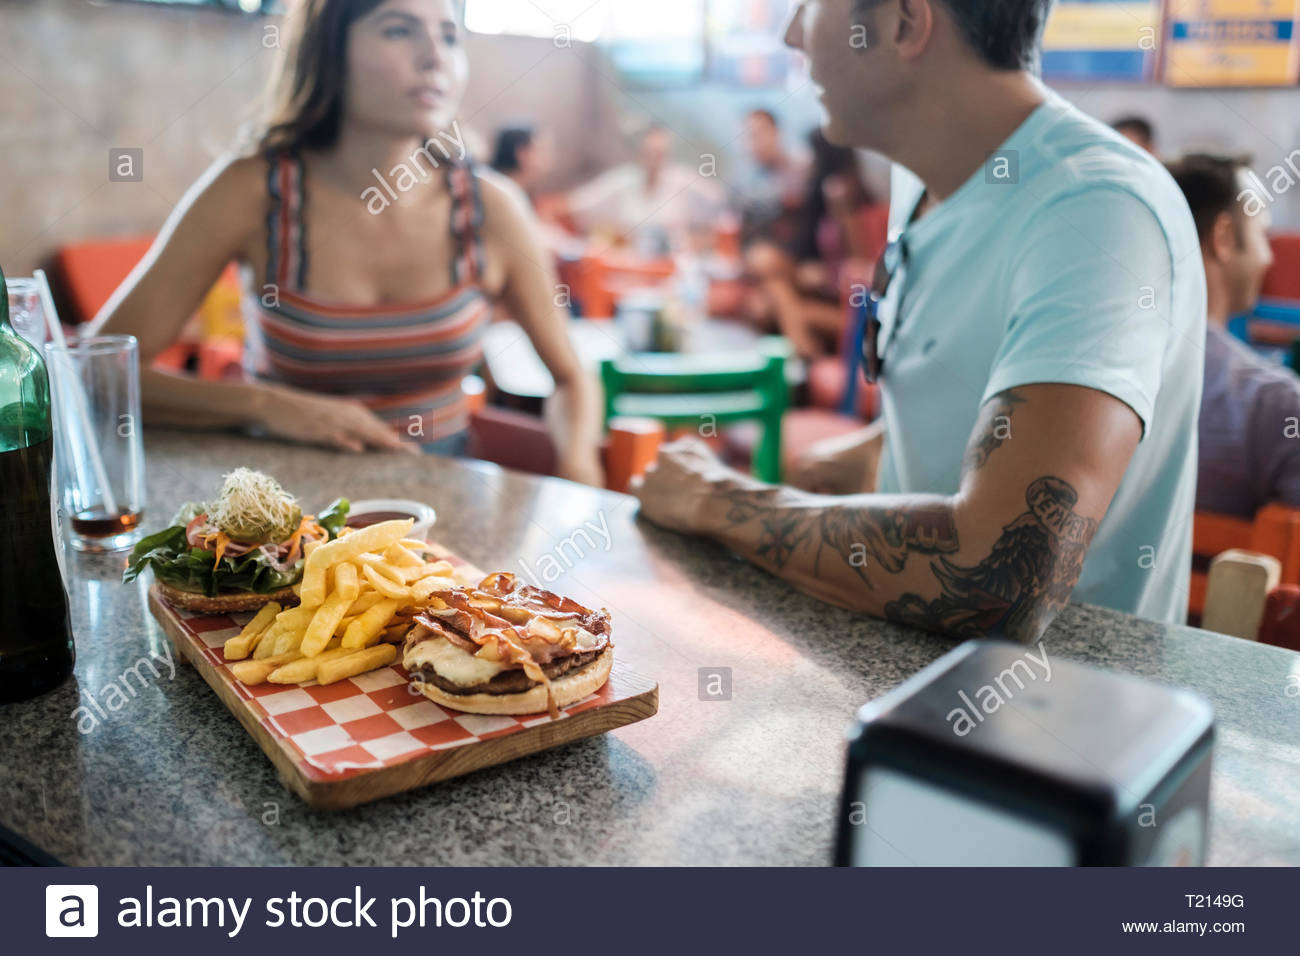 Hamburger And French Fries On Counter In A Bar With Couple